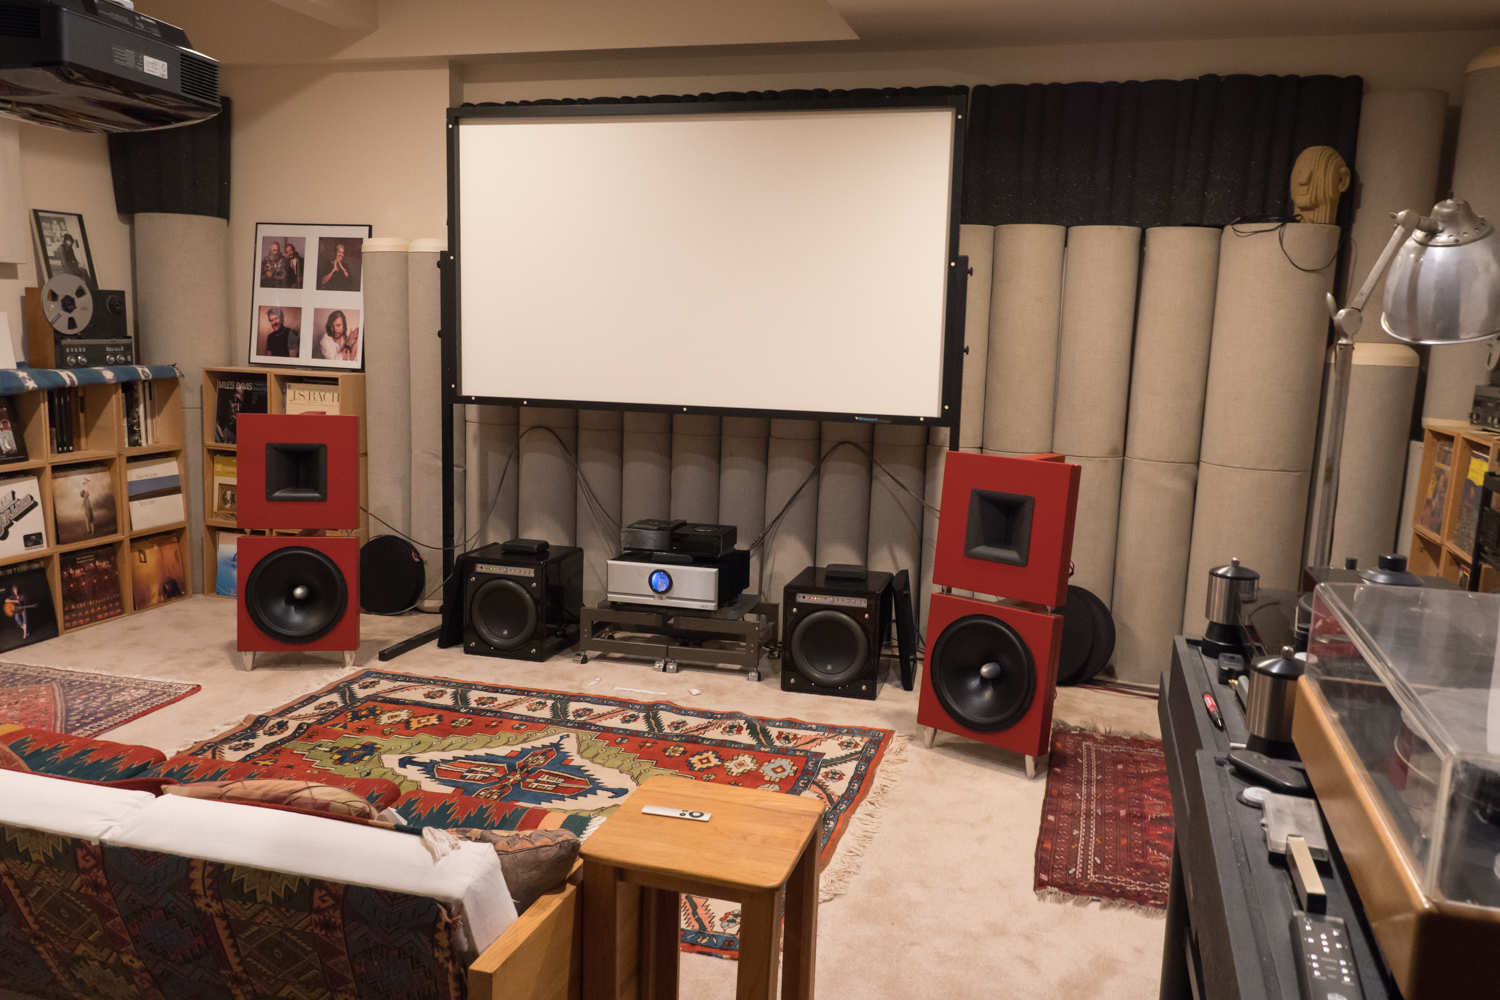 http://audiophilereview.com/images/CASmeeting3a.jpg